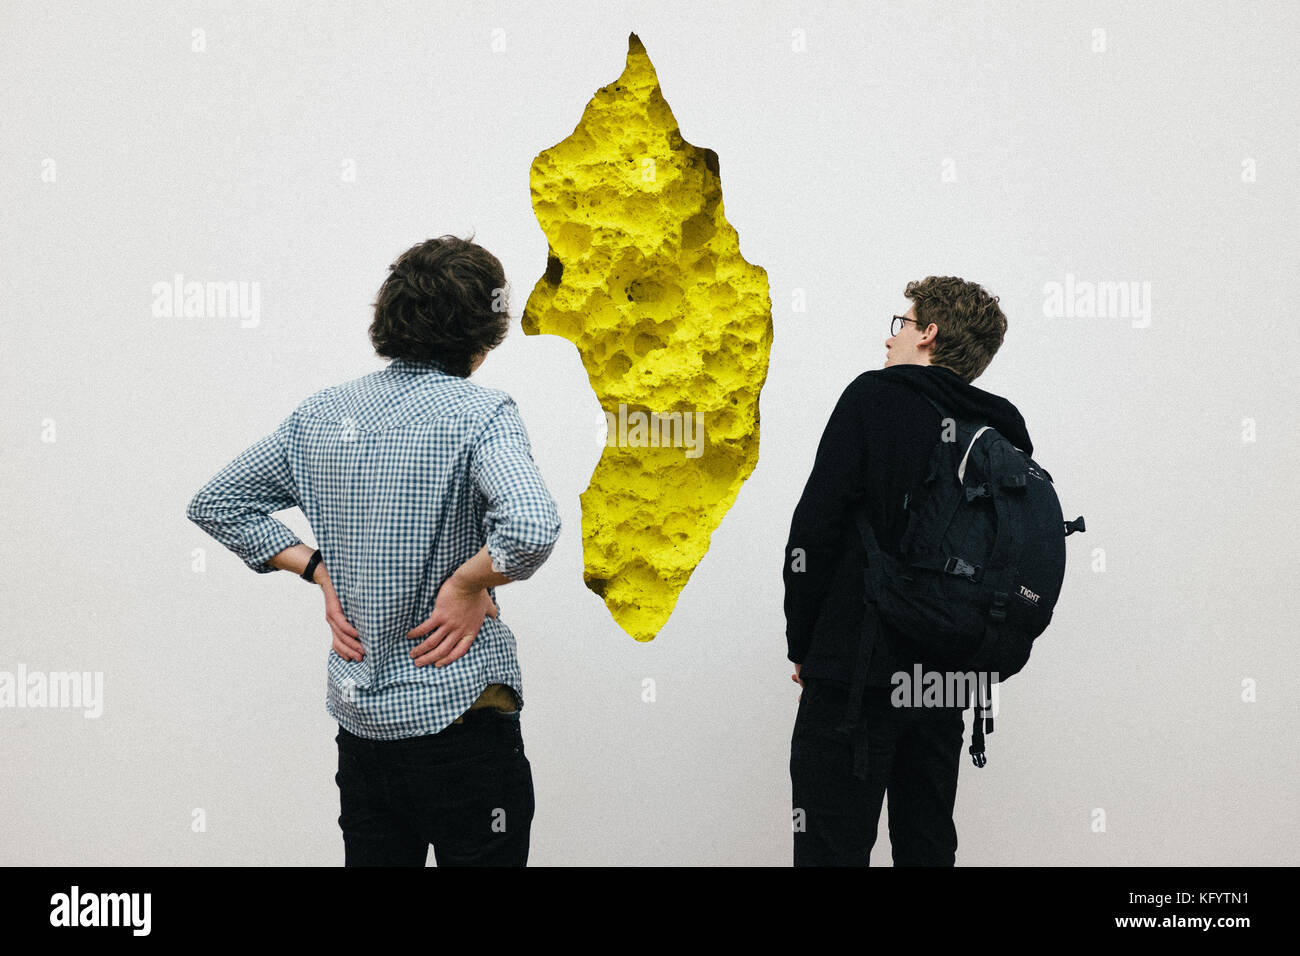 Istanbul, Turkey - January 21, 2014. Two visitors are looking at Anish Kapoor's work Yellow at the Sakip Sabanci Museum in Istanbul. Stock Photo